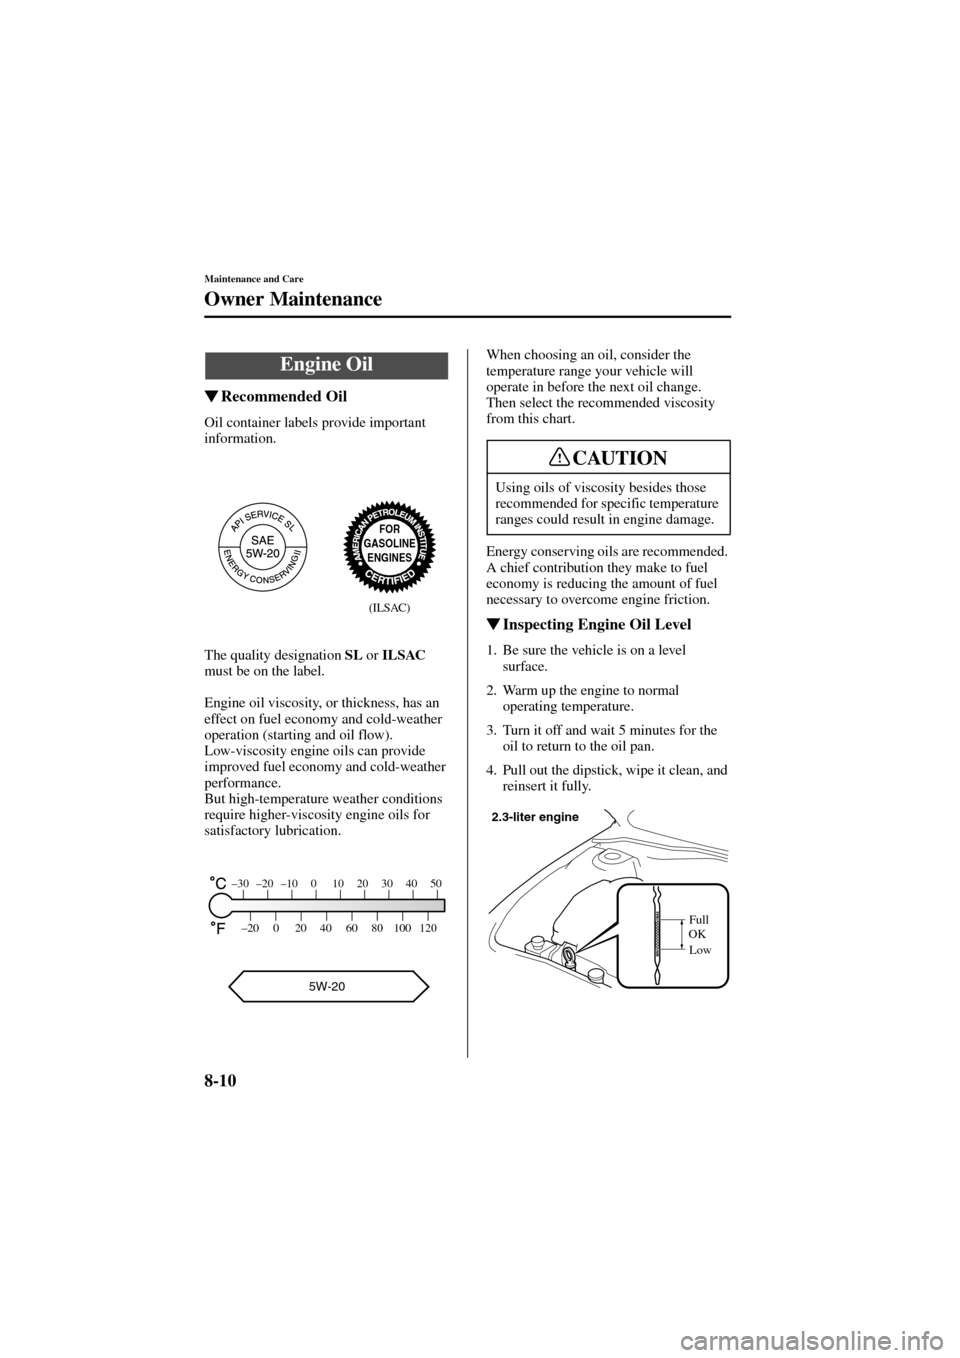 MAZDA MODEL 6 2004  Owners Manual (in English) 8-10
Maintenance and Care
Owner Maintenance
Form No. 8R29-EA-02I
Recommended Oil
Oil container labels provide important 
information.
The quality designation SL
 or ILSAC
 
must be on the label.
Engi